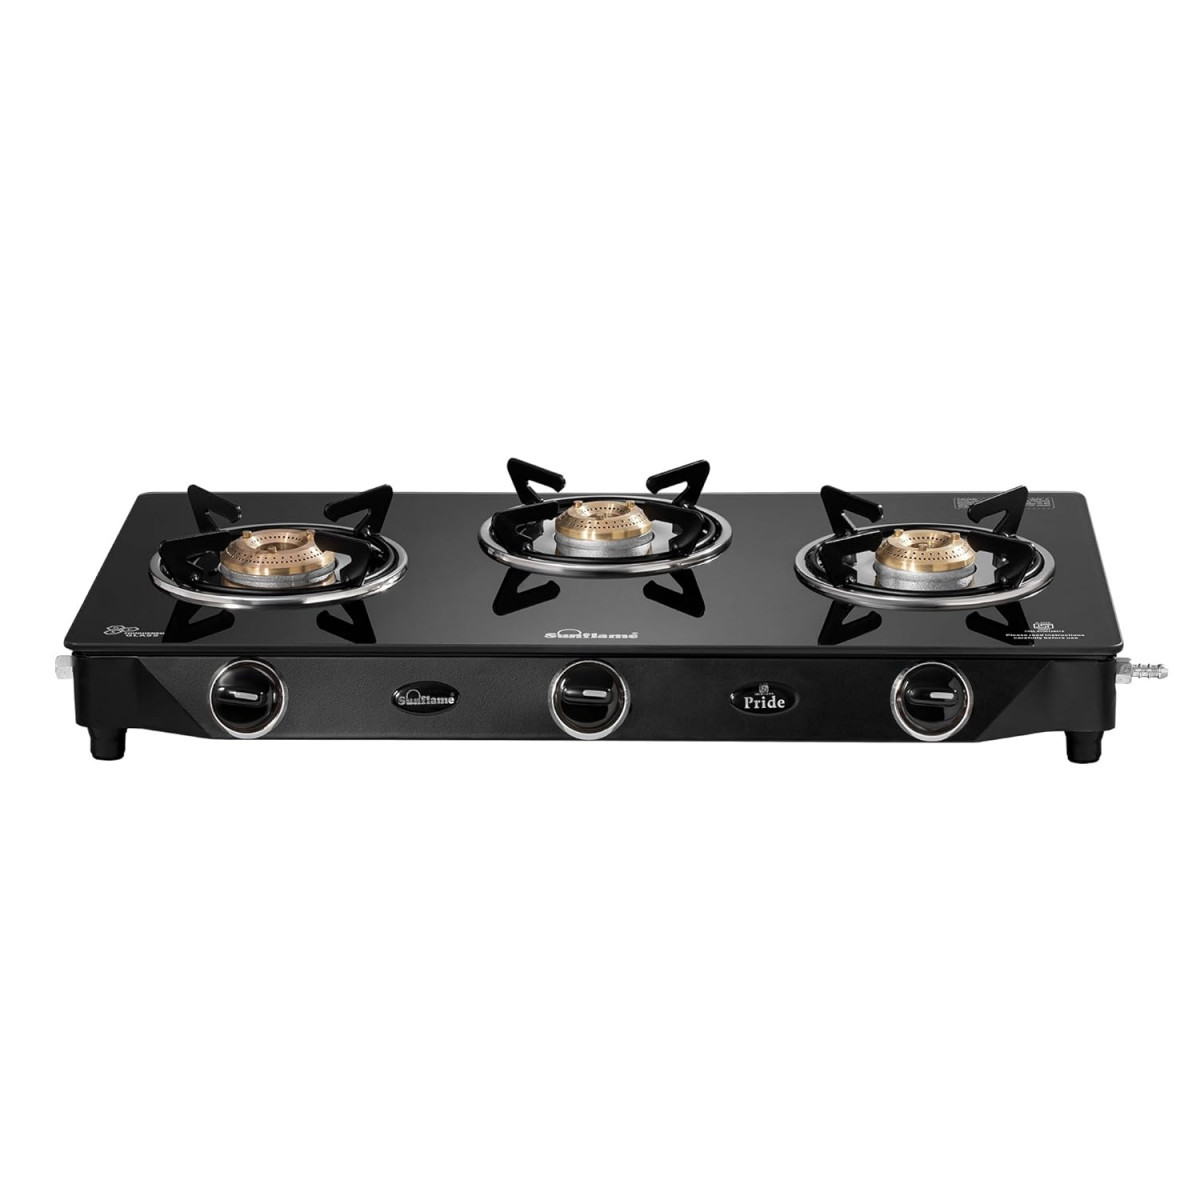 Sunflame Pride 3 Burner Gas Stove  2-Years Product Coverage  2 Small and 1 Medium Brass Burners  Ergonomic Knobs  Easy to Maintain l Toughened Glass Top  PAN India Presence  Black